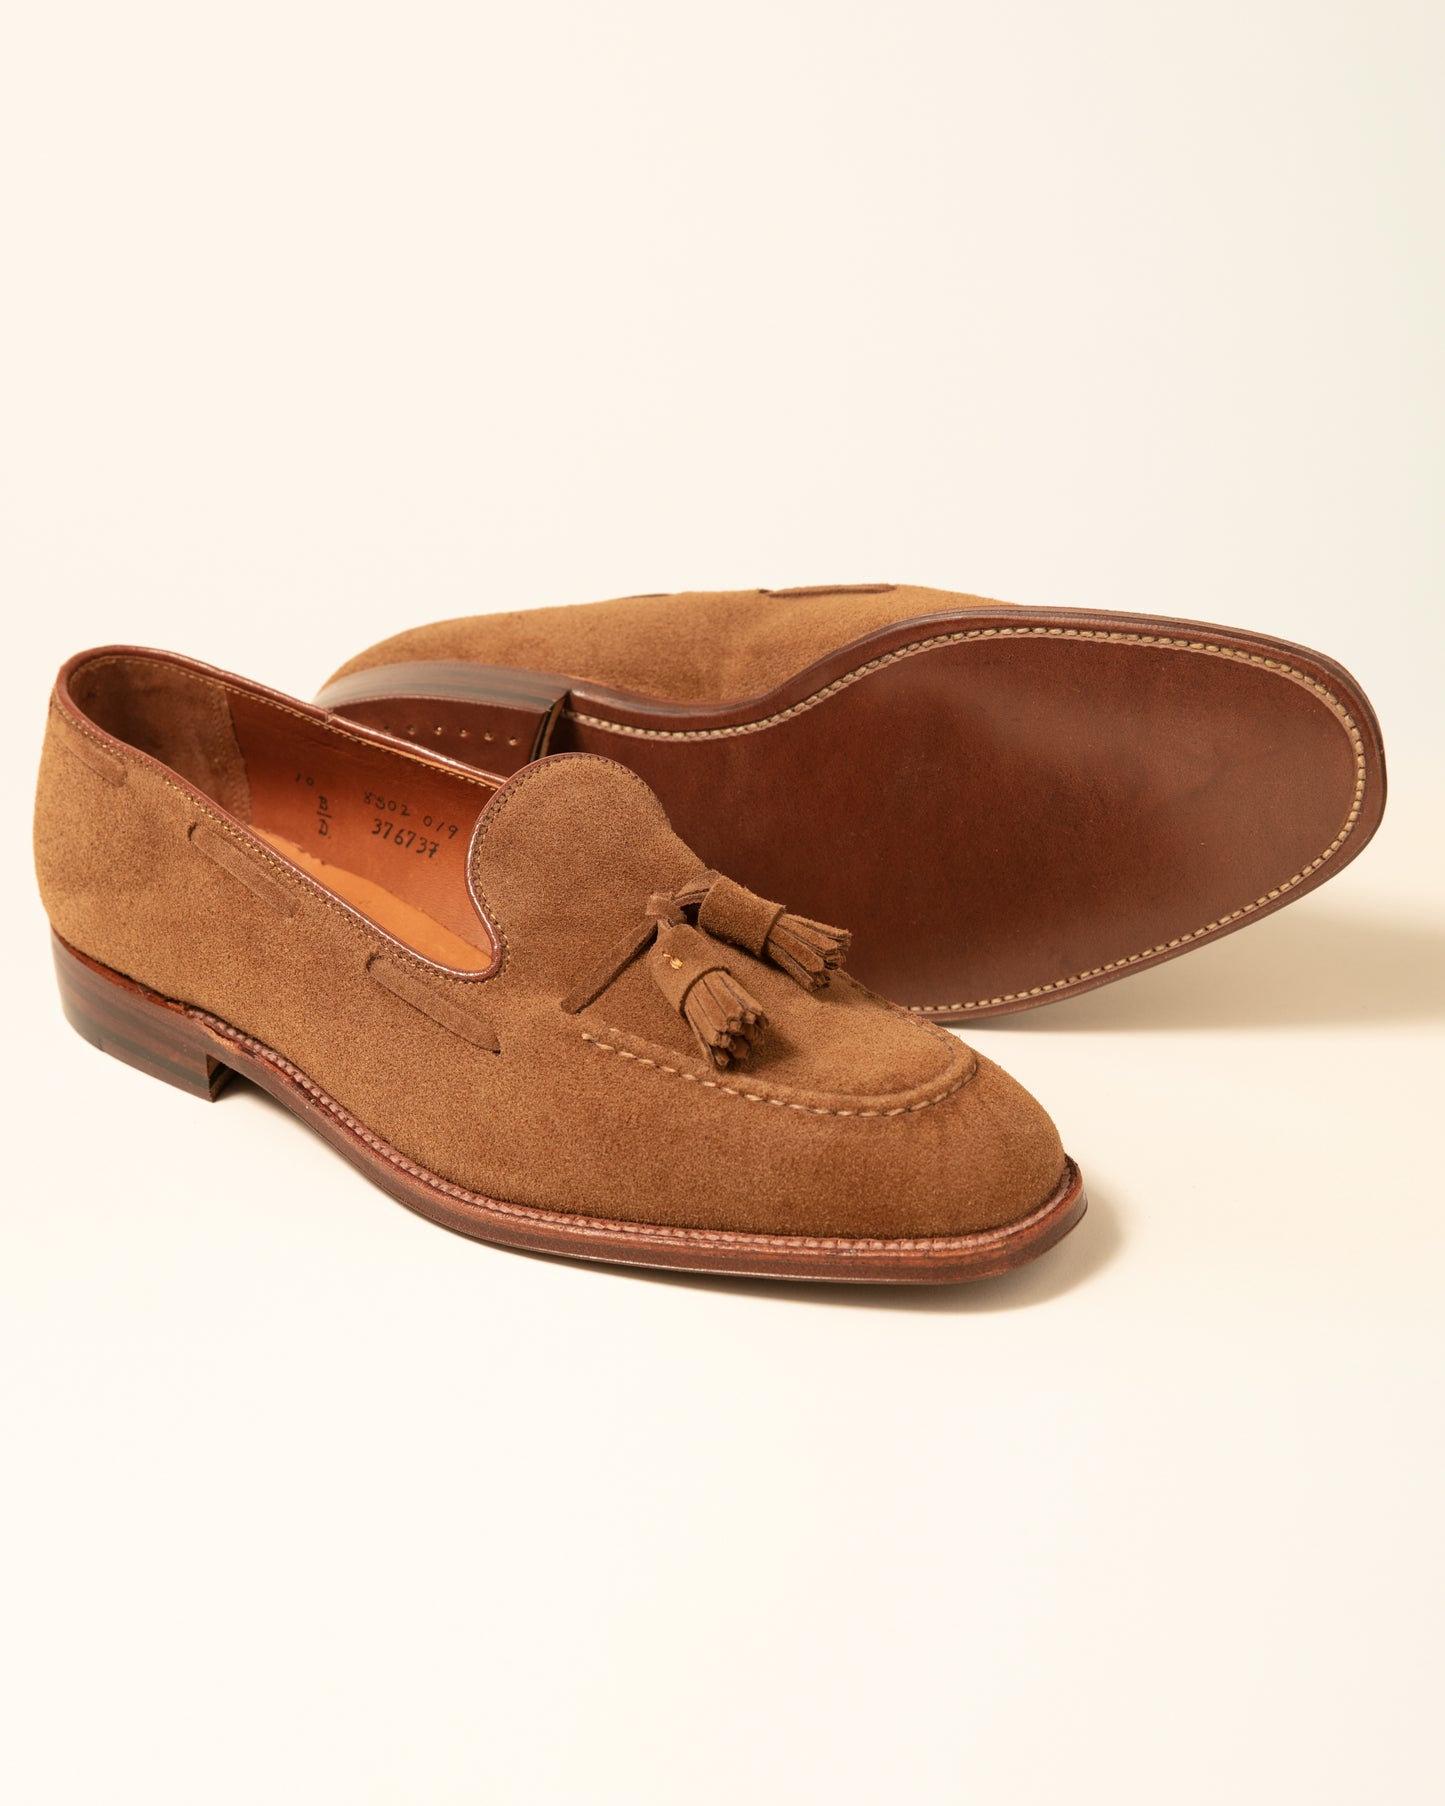 "Bright" Handsewn Tassel Loafer in Snuff Suede - Plaza - Leather